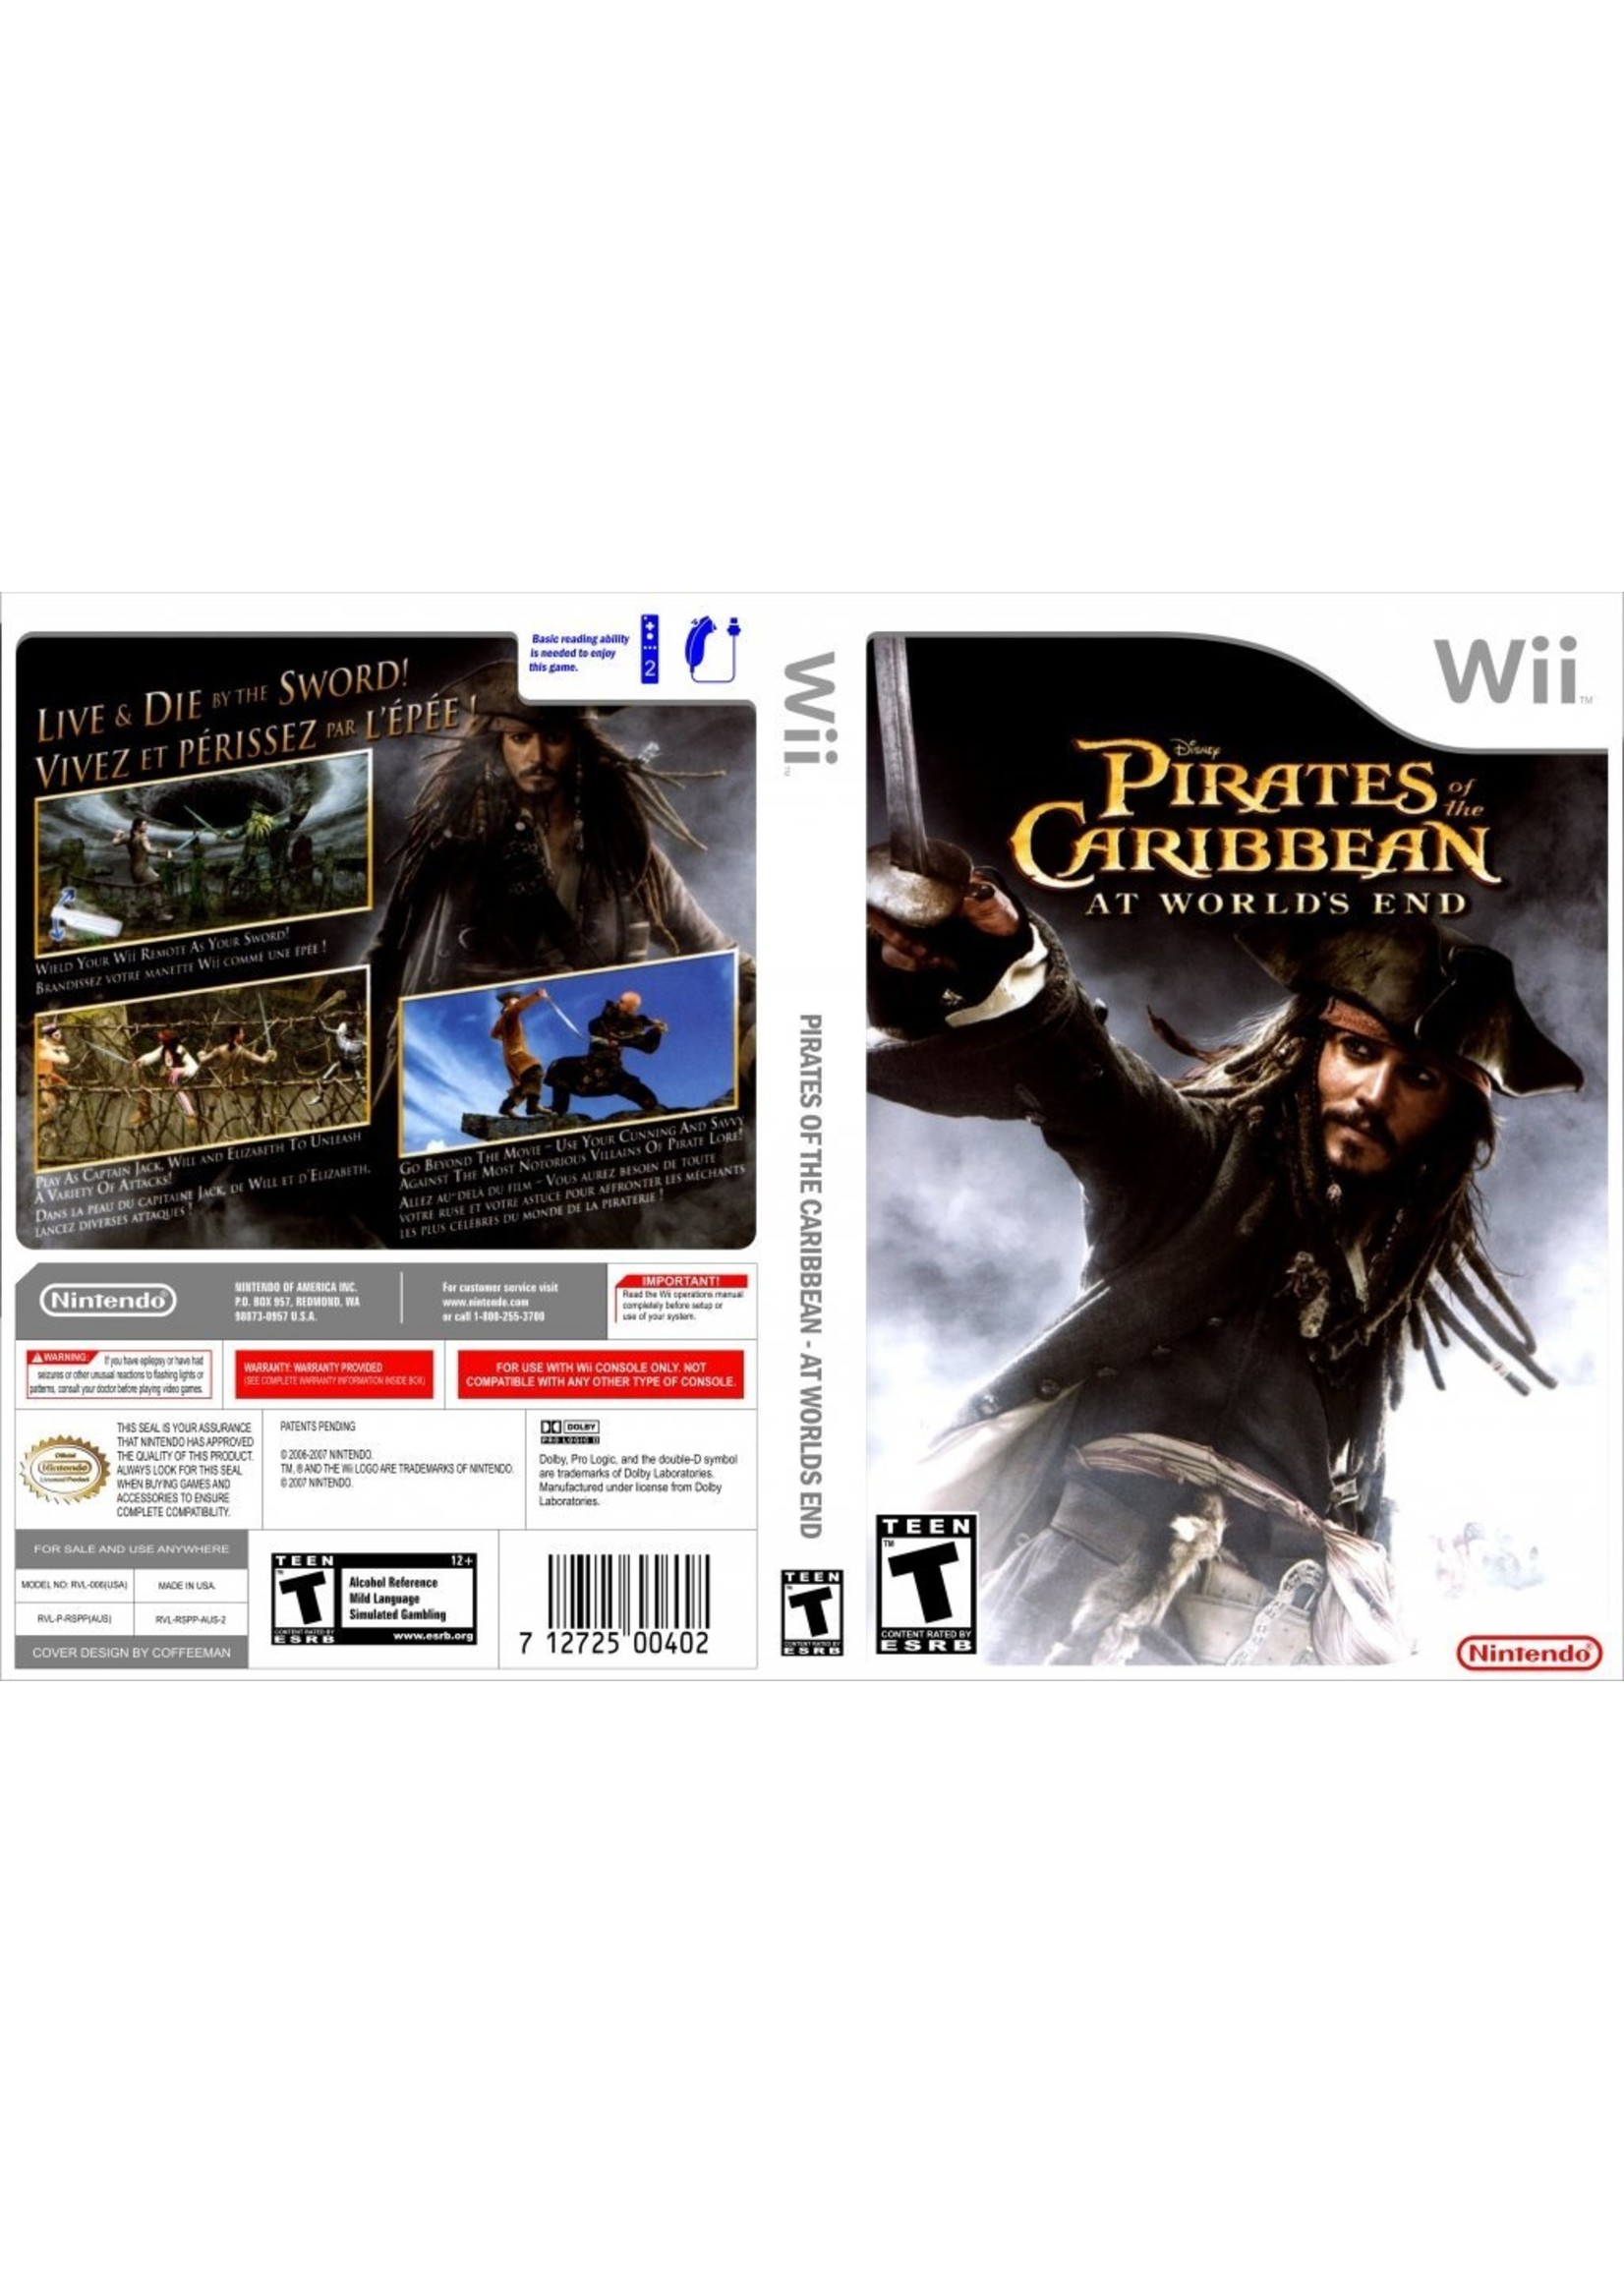 Nintendo Wii Pirates of the Caribbean At World's End